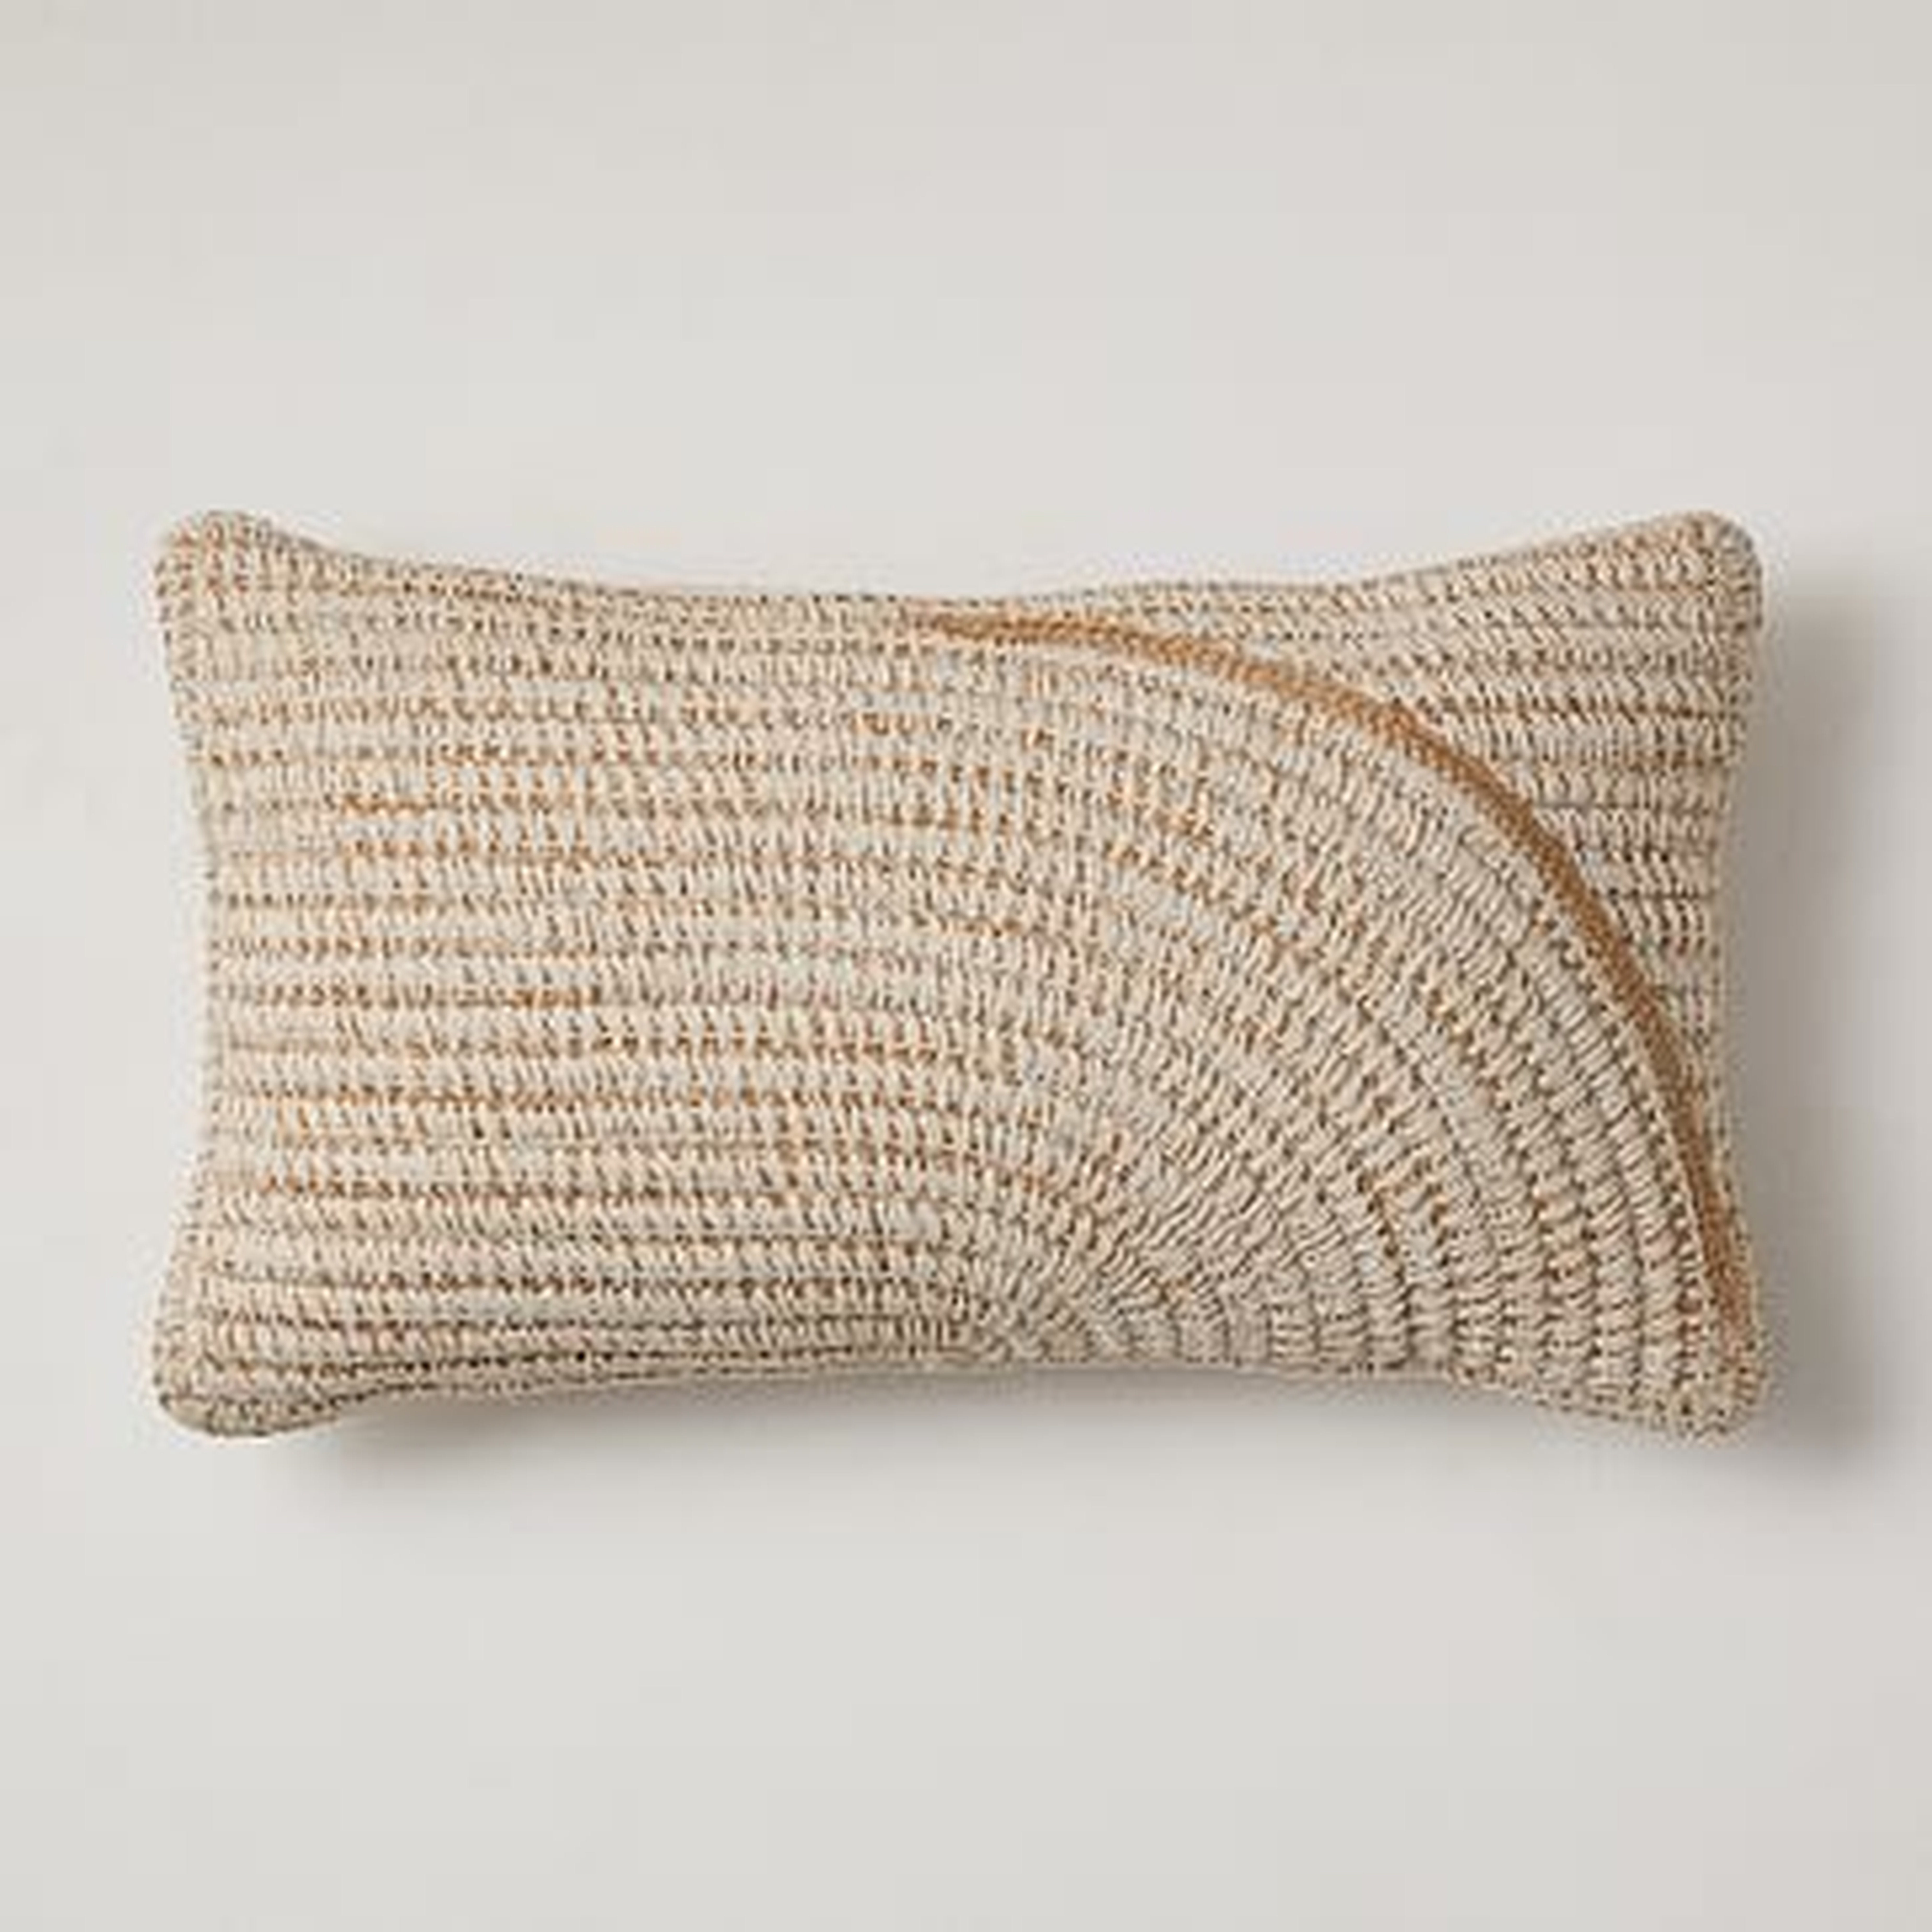 Outdoor Woven Arches Pillow, 12"x21", Natural - West Elm